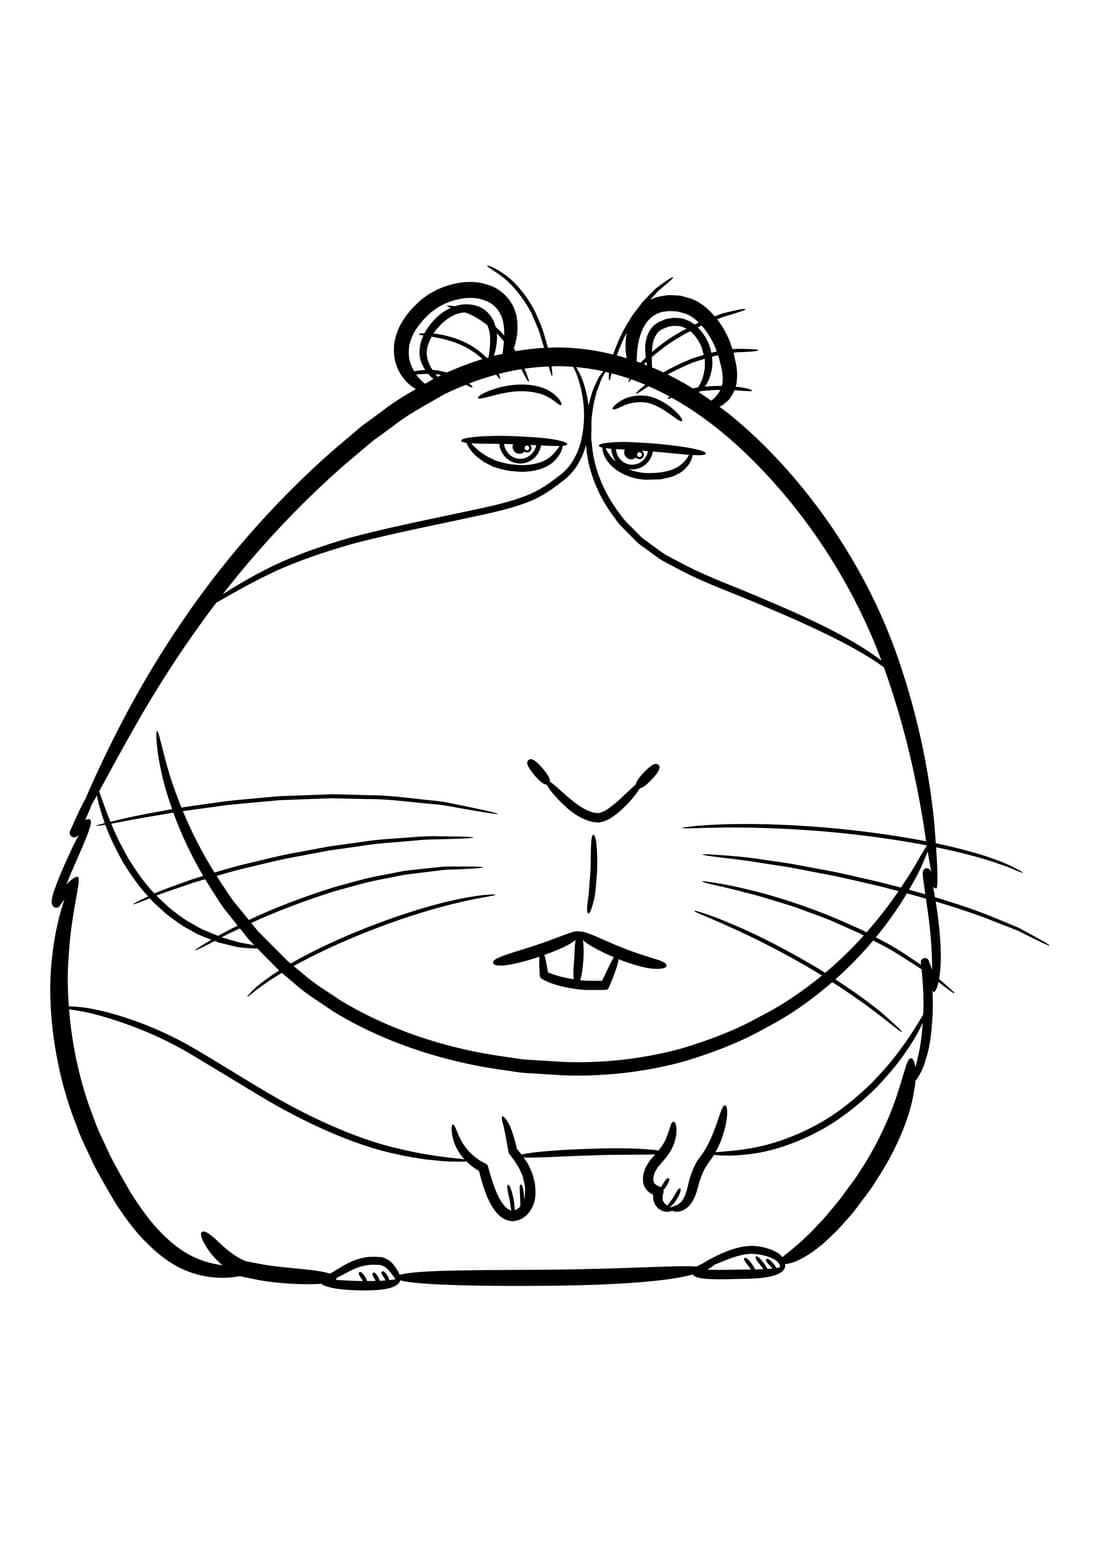 Hamster coloring pages - Print for free | WONDER DAY — Coloring pages